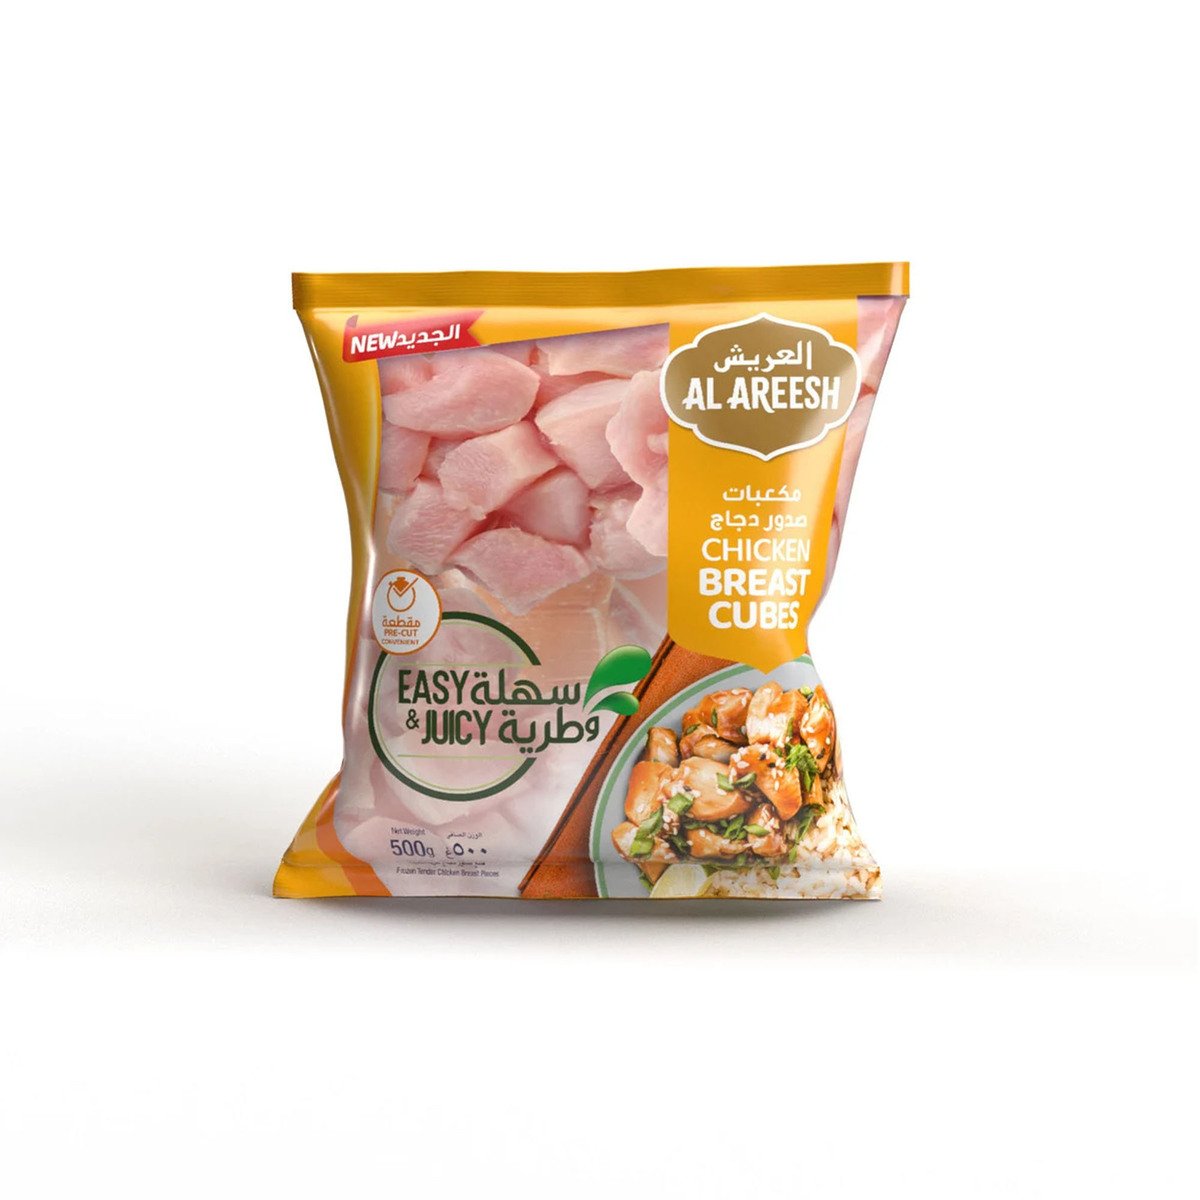 Al Areesh Chicken Breast Cubes Value Pack 500 g